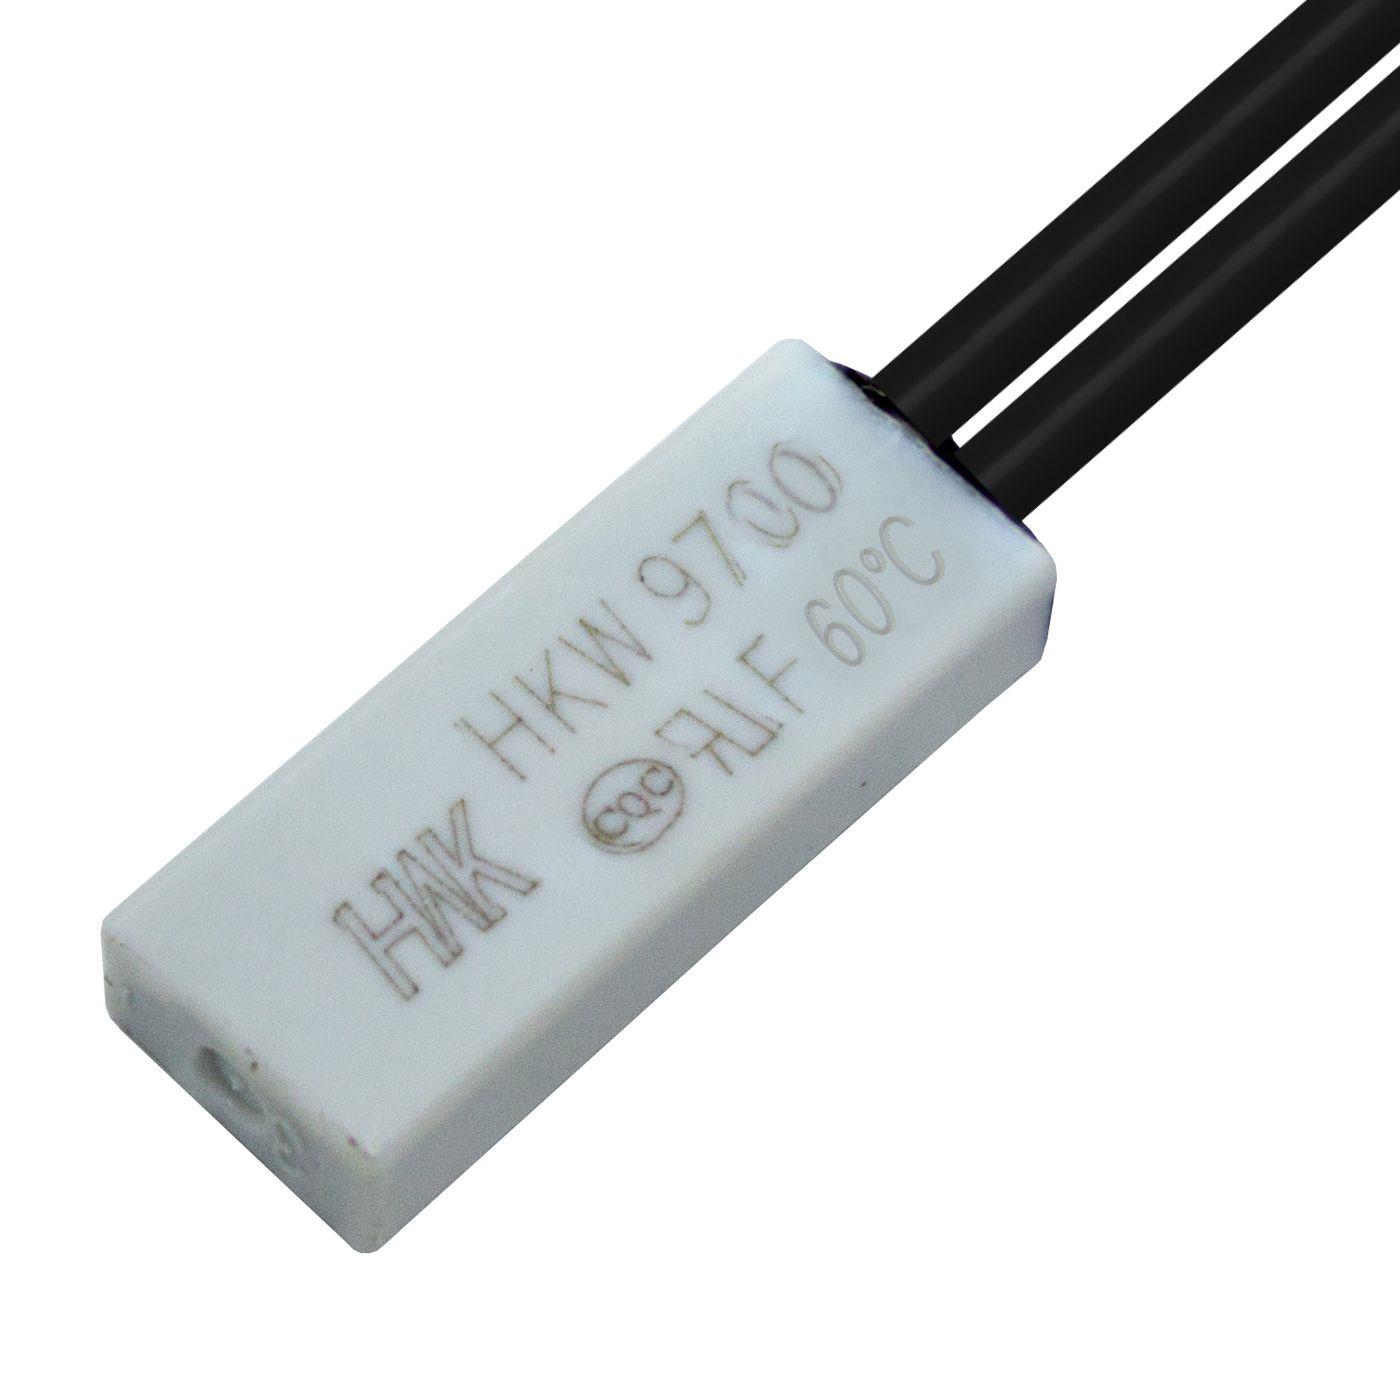 Thermal switch 60°C NC contact 250V 5A Cable Temperature switch thermostat Bimetal Thermal protection